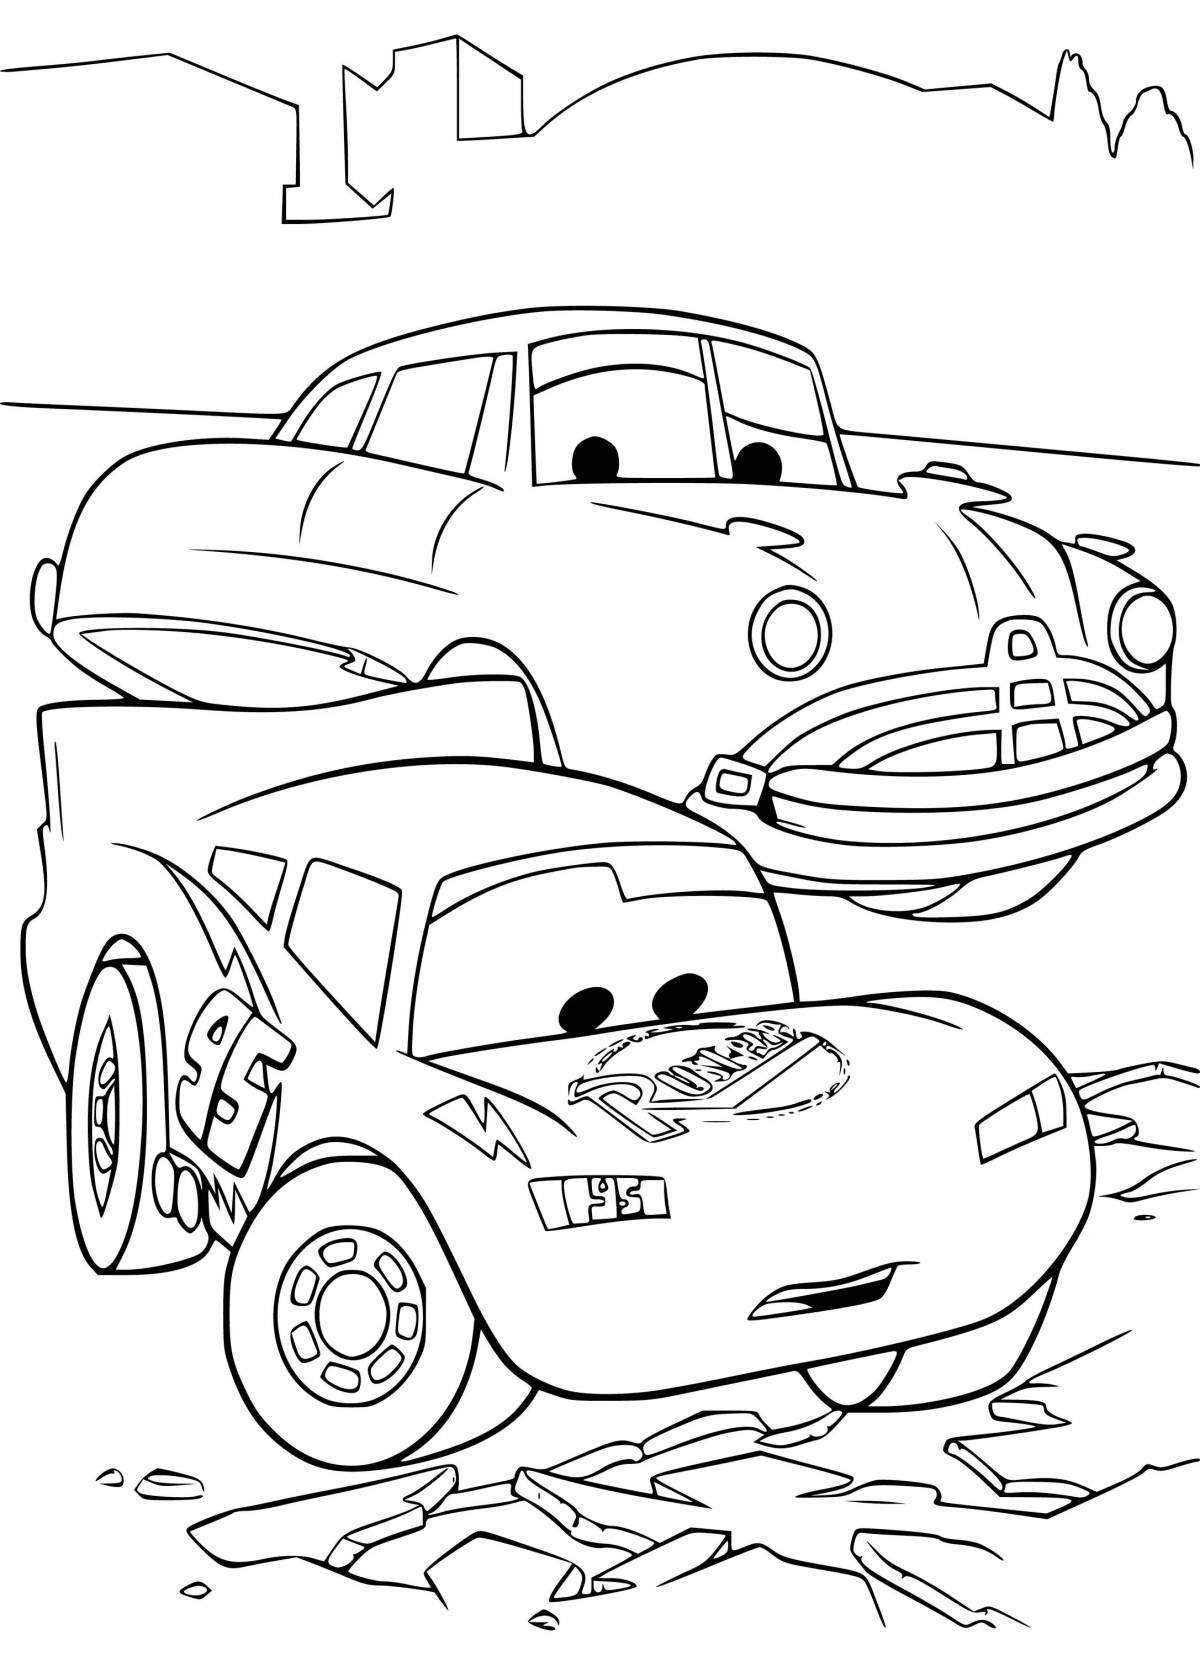 Great makvin coloring book for boys